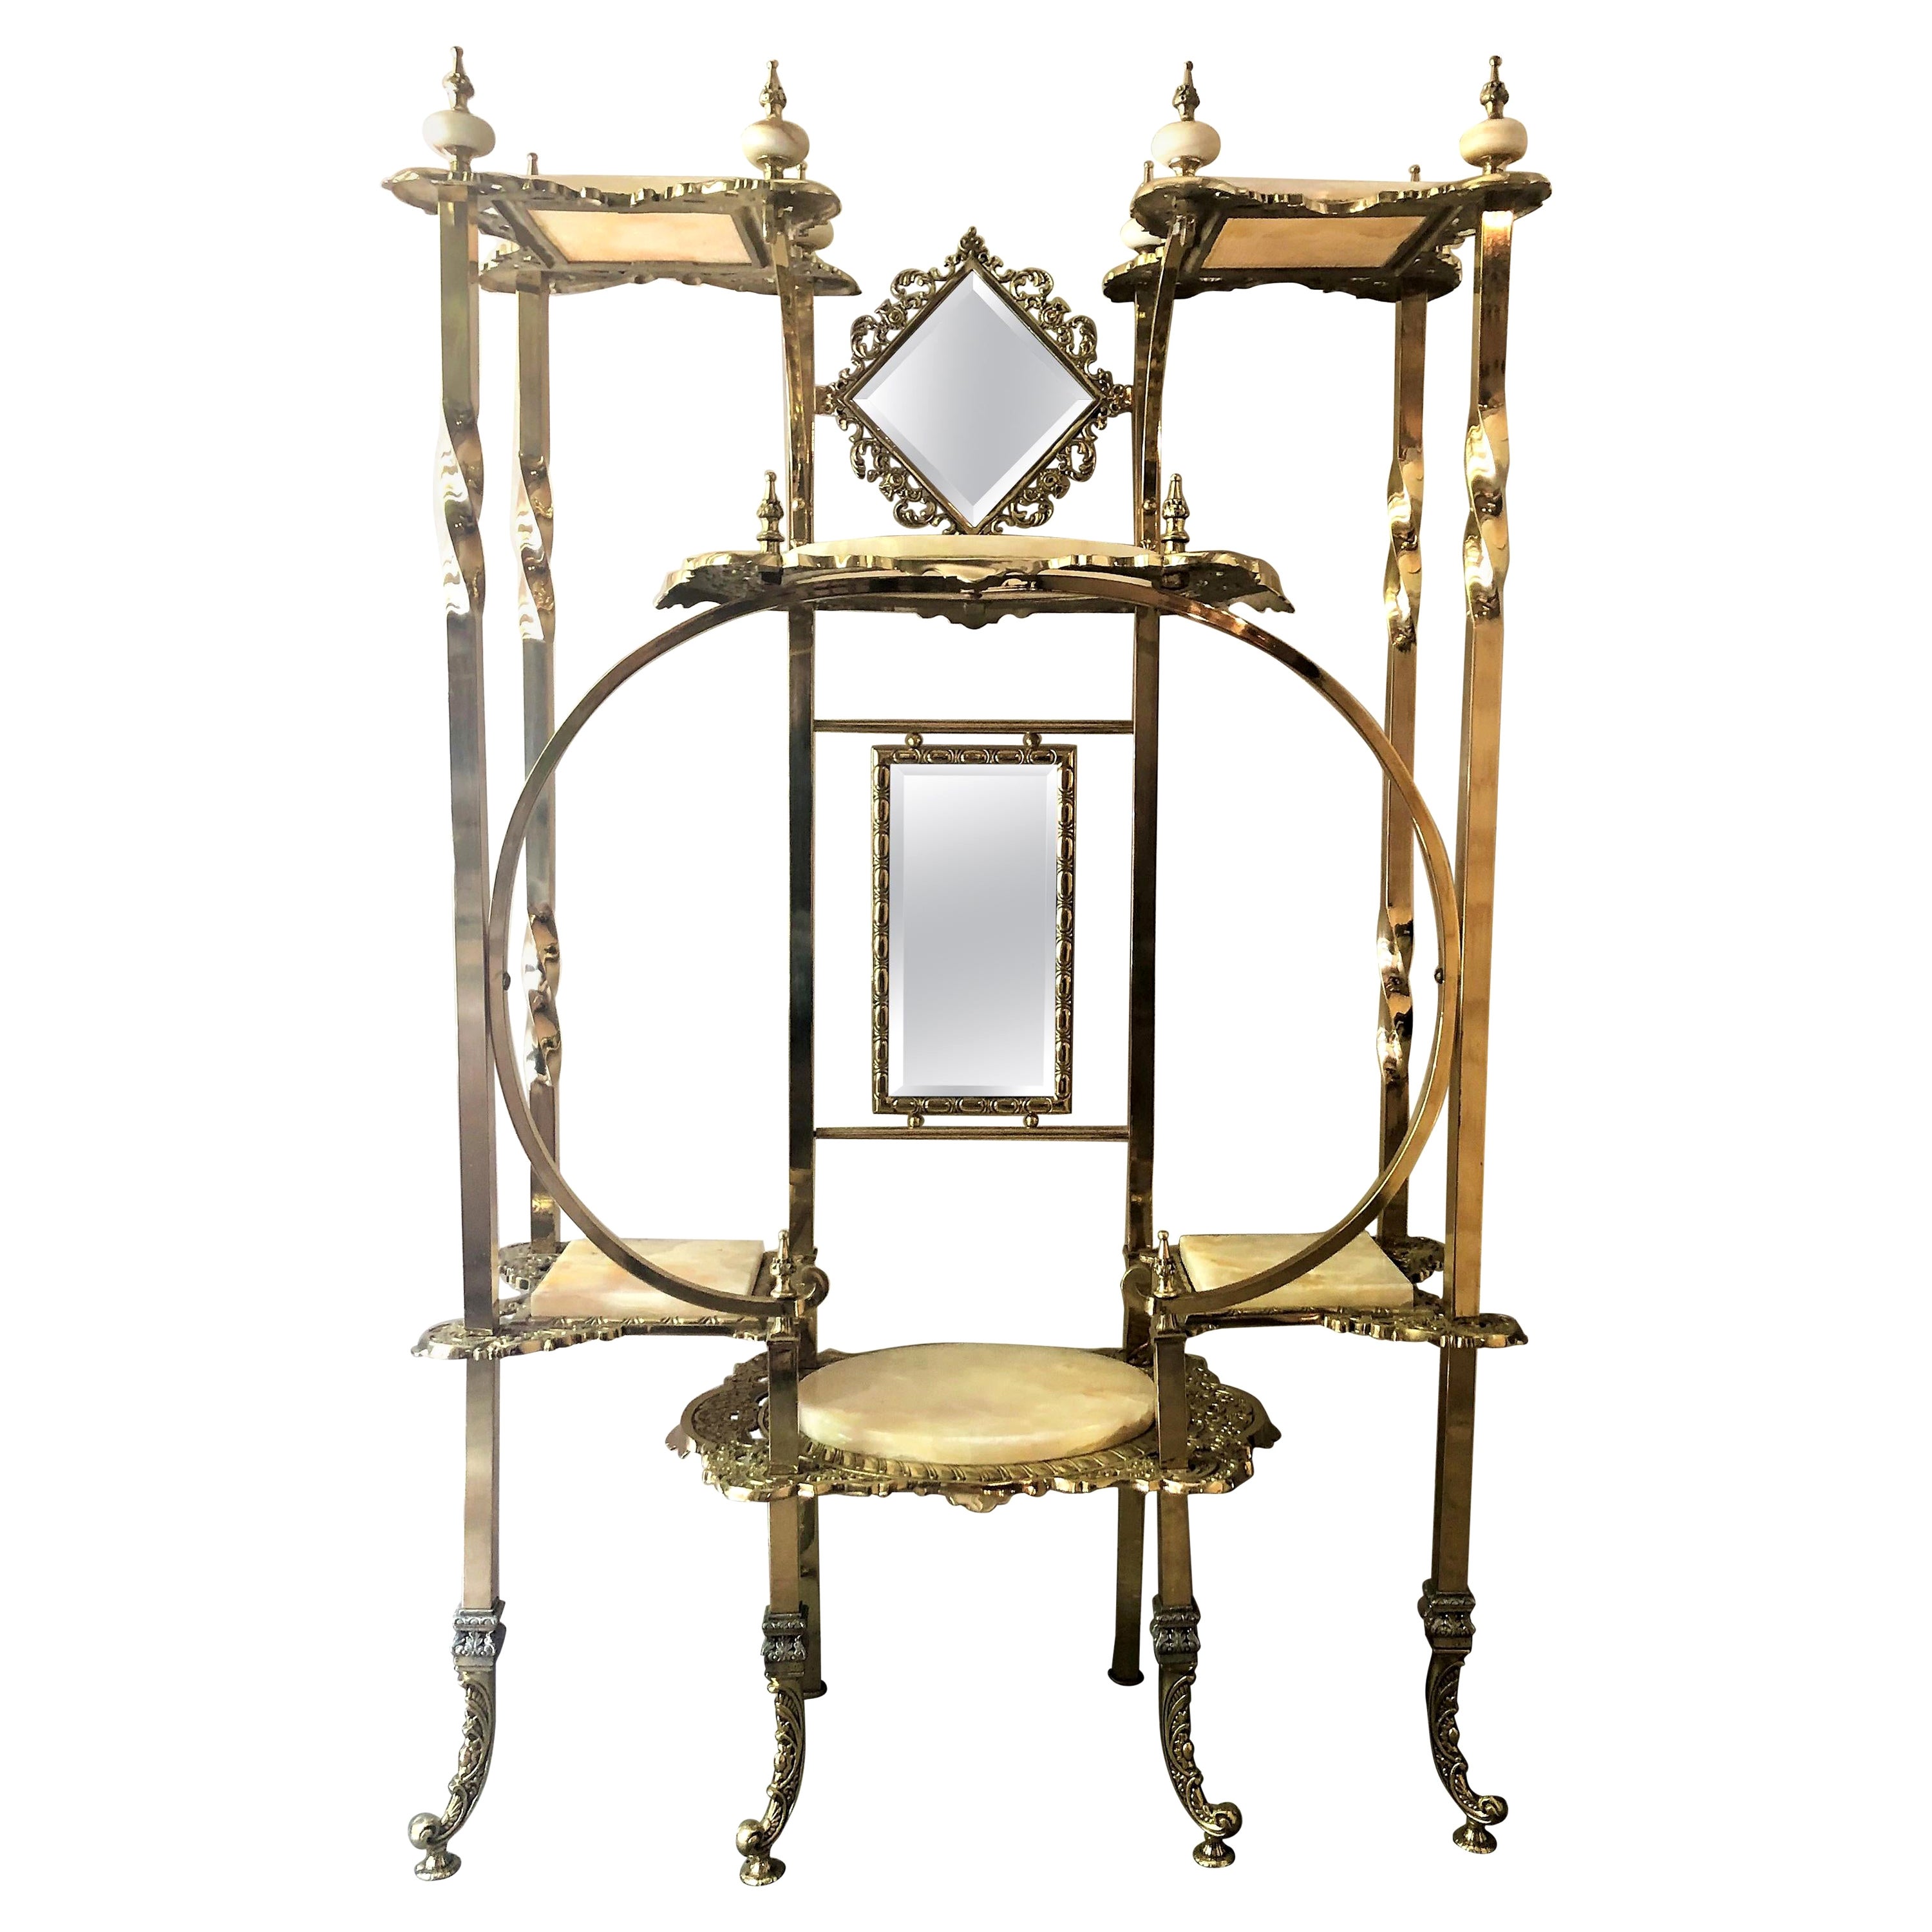 Antique English High Victorian Brass and Onyx Mirrored Etagere, Circa 1890-1910